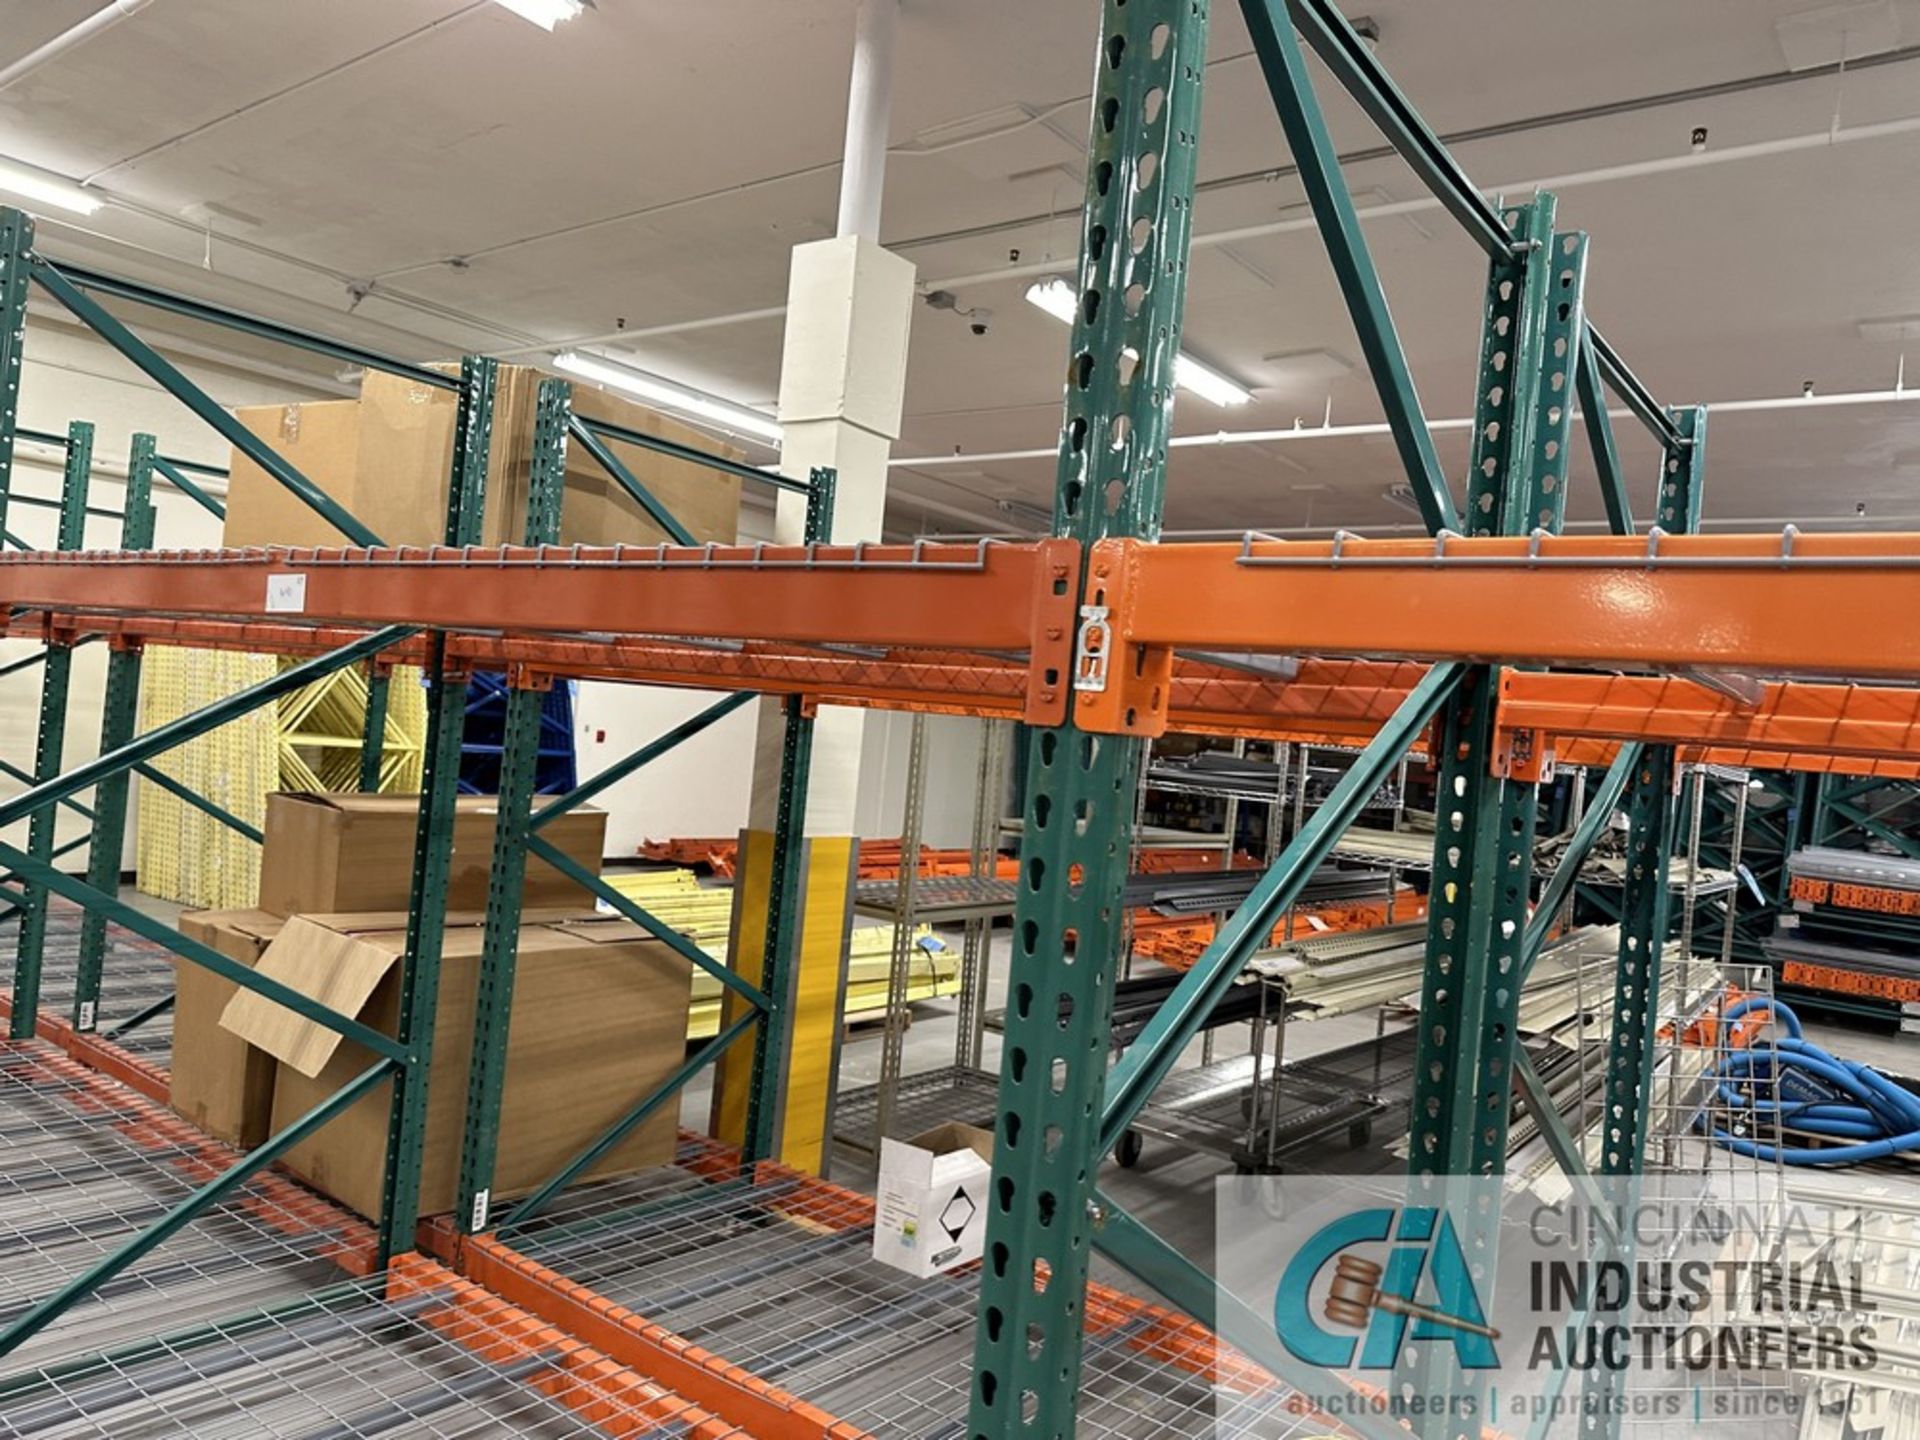 (LOT) (8) SECTIONS 96" X 42" X 96" AND (2) SECTIONS 72" X 42" X 96" ADJUSTABLE BEAM PALLET RACK - Image 4 of 8